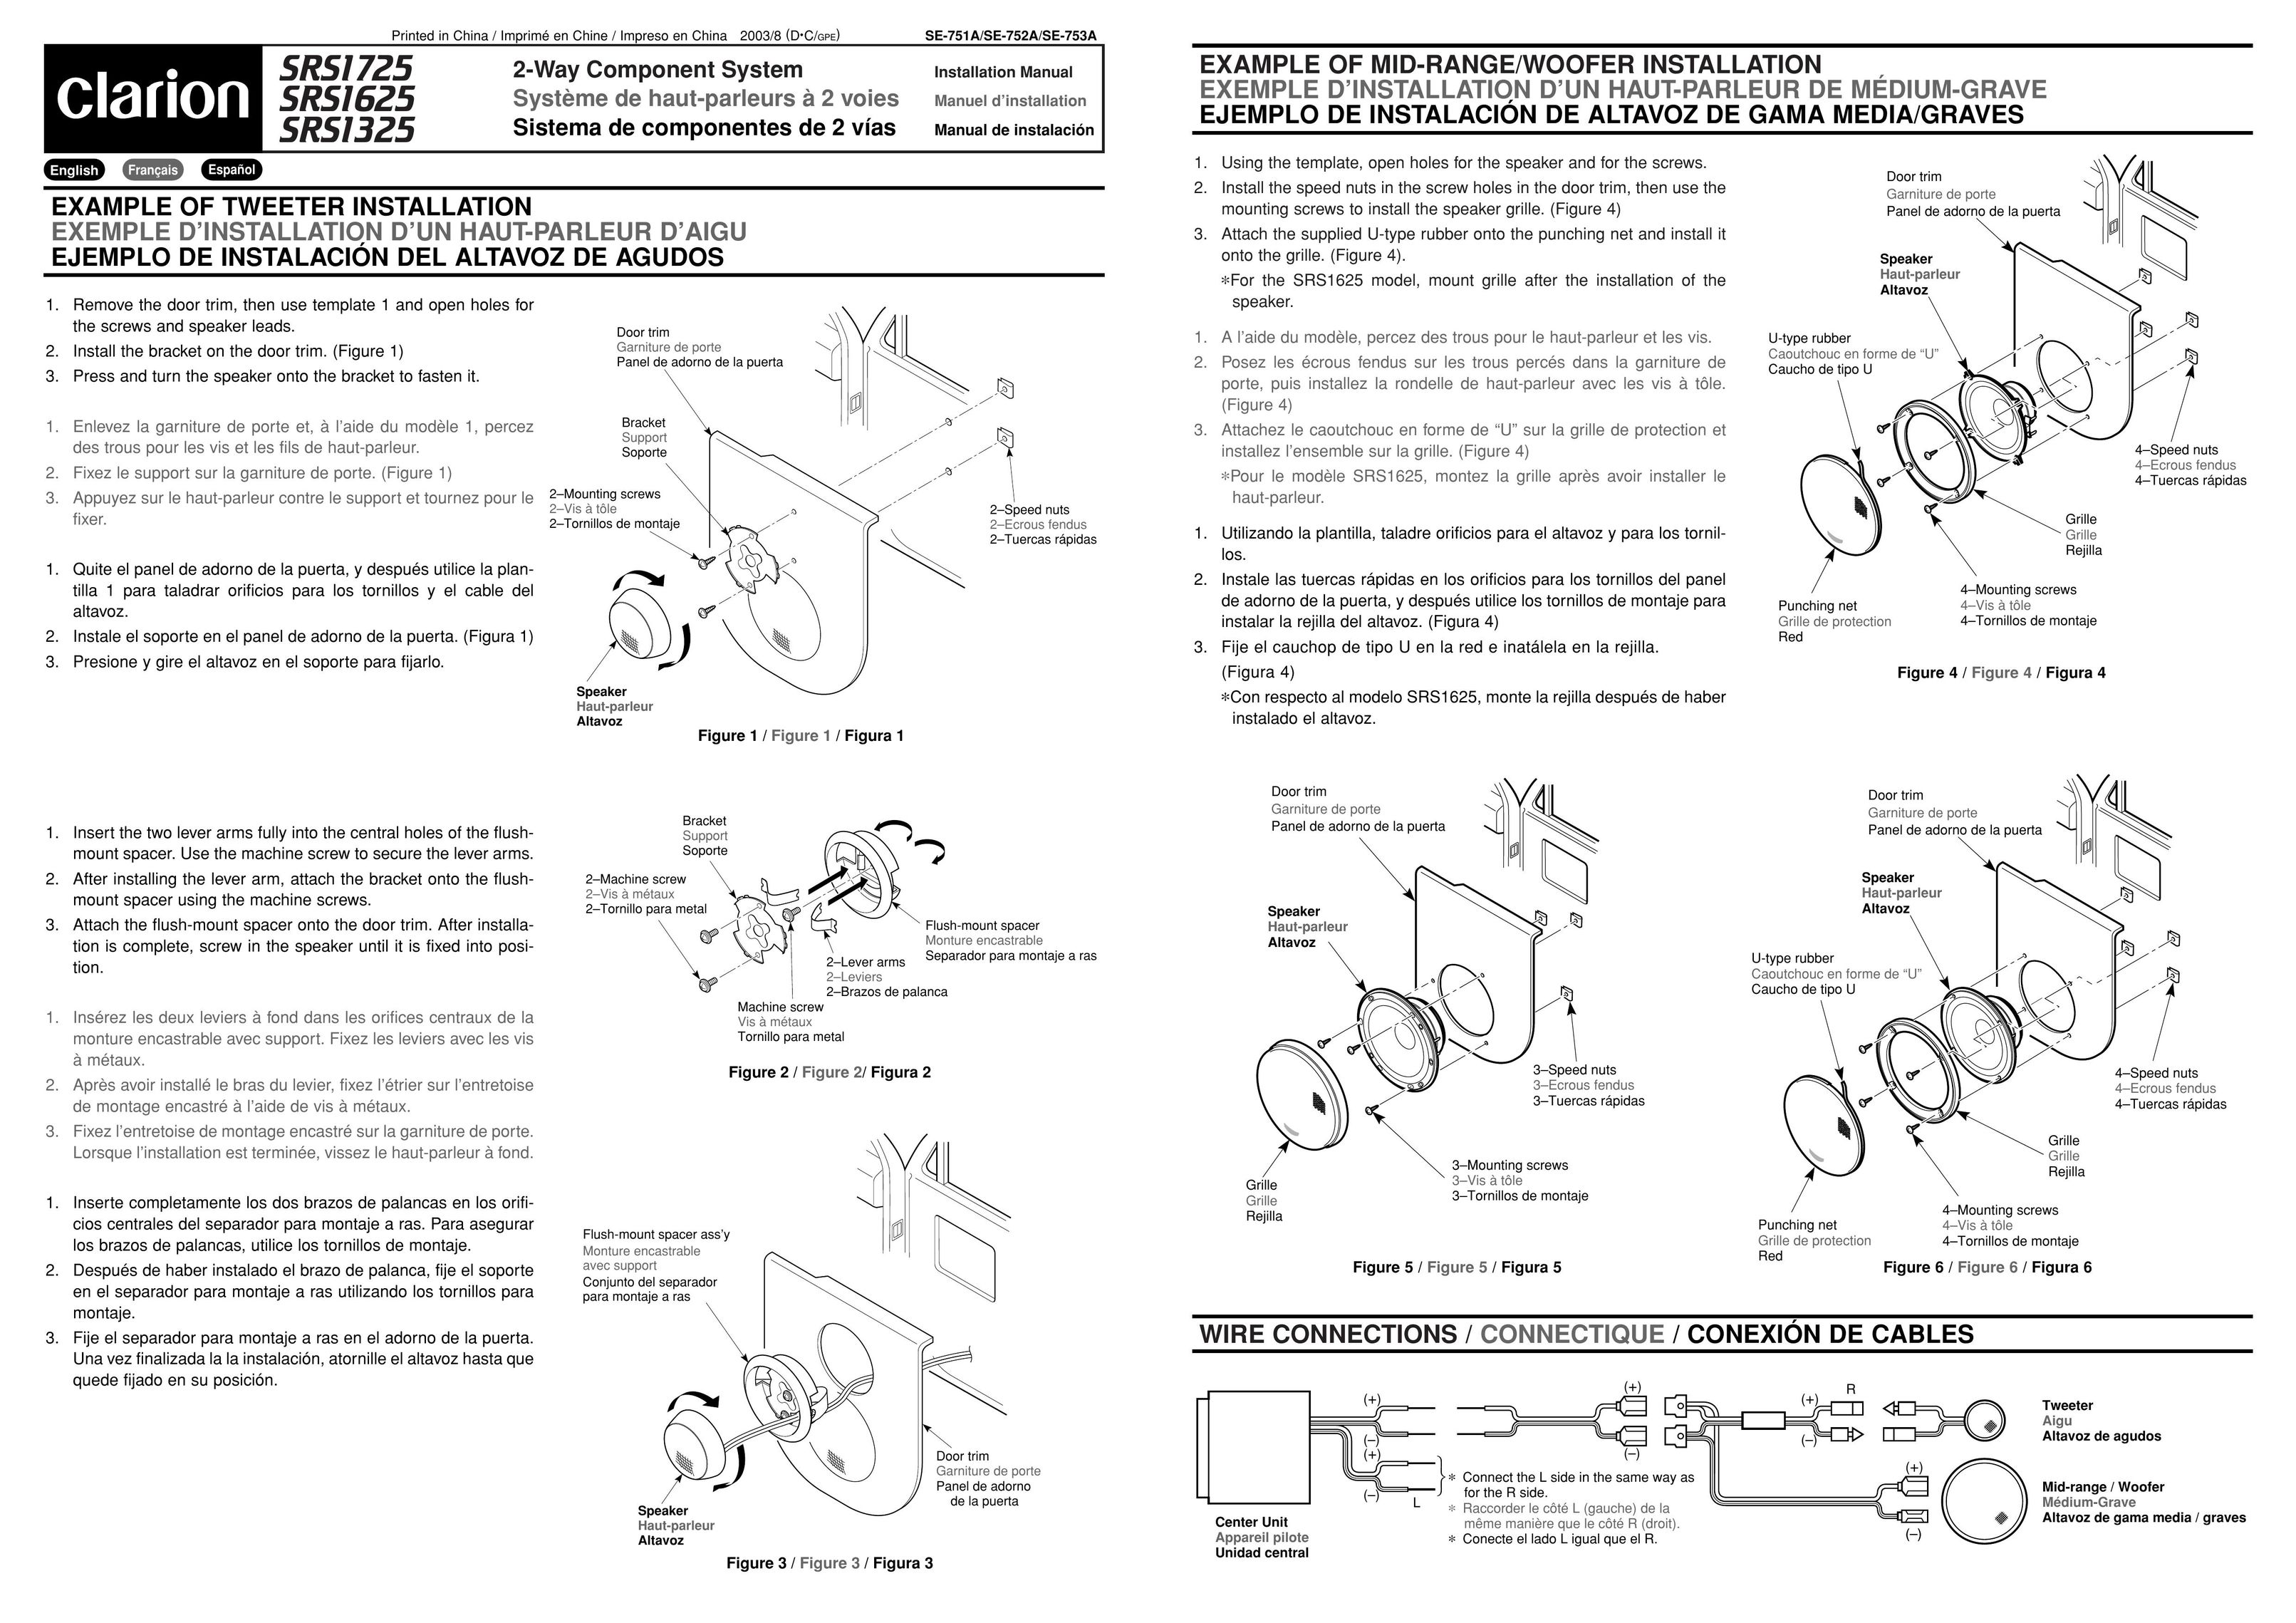 Clarion SRS1725 Stereo System User Manual